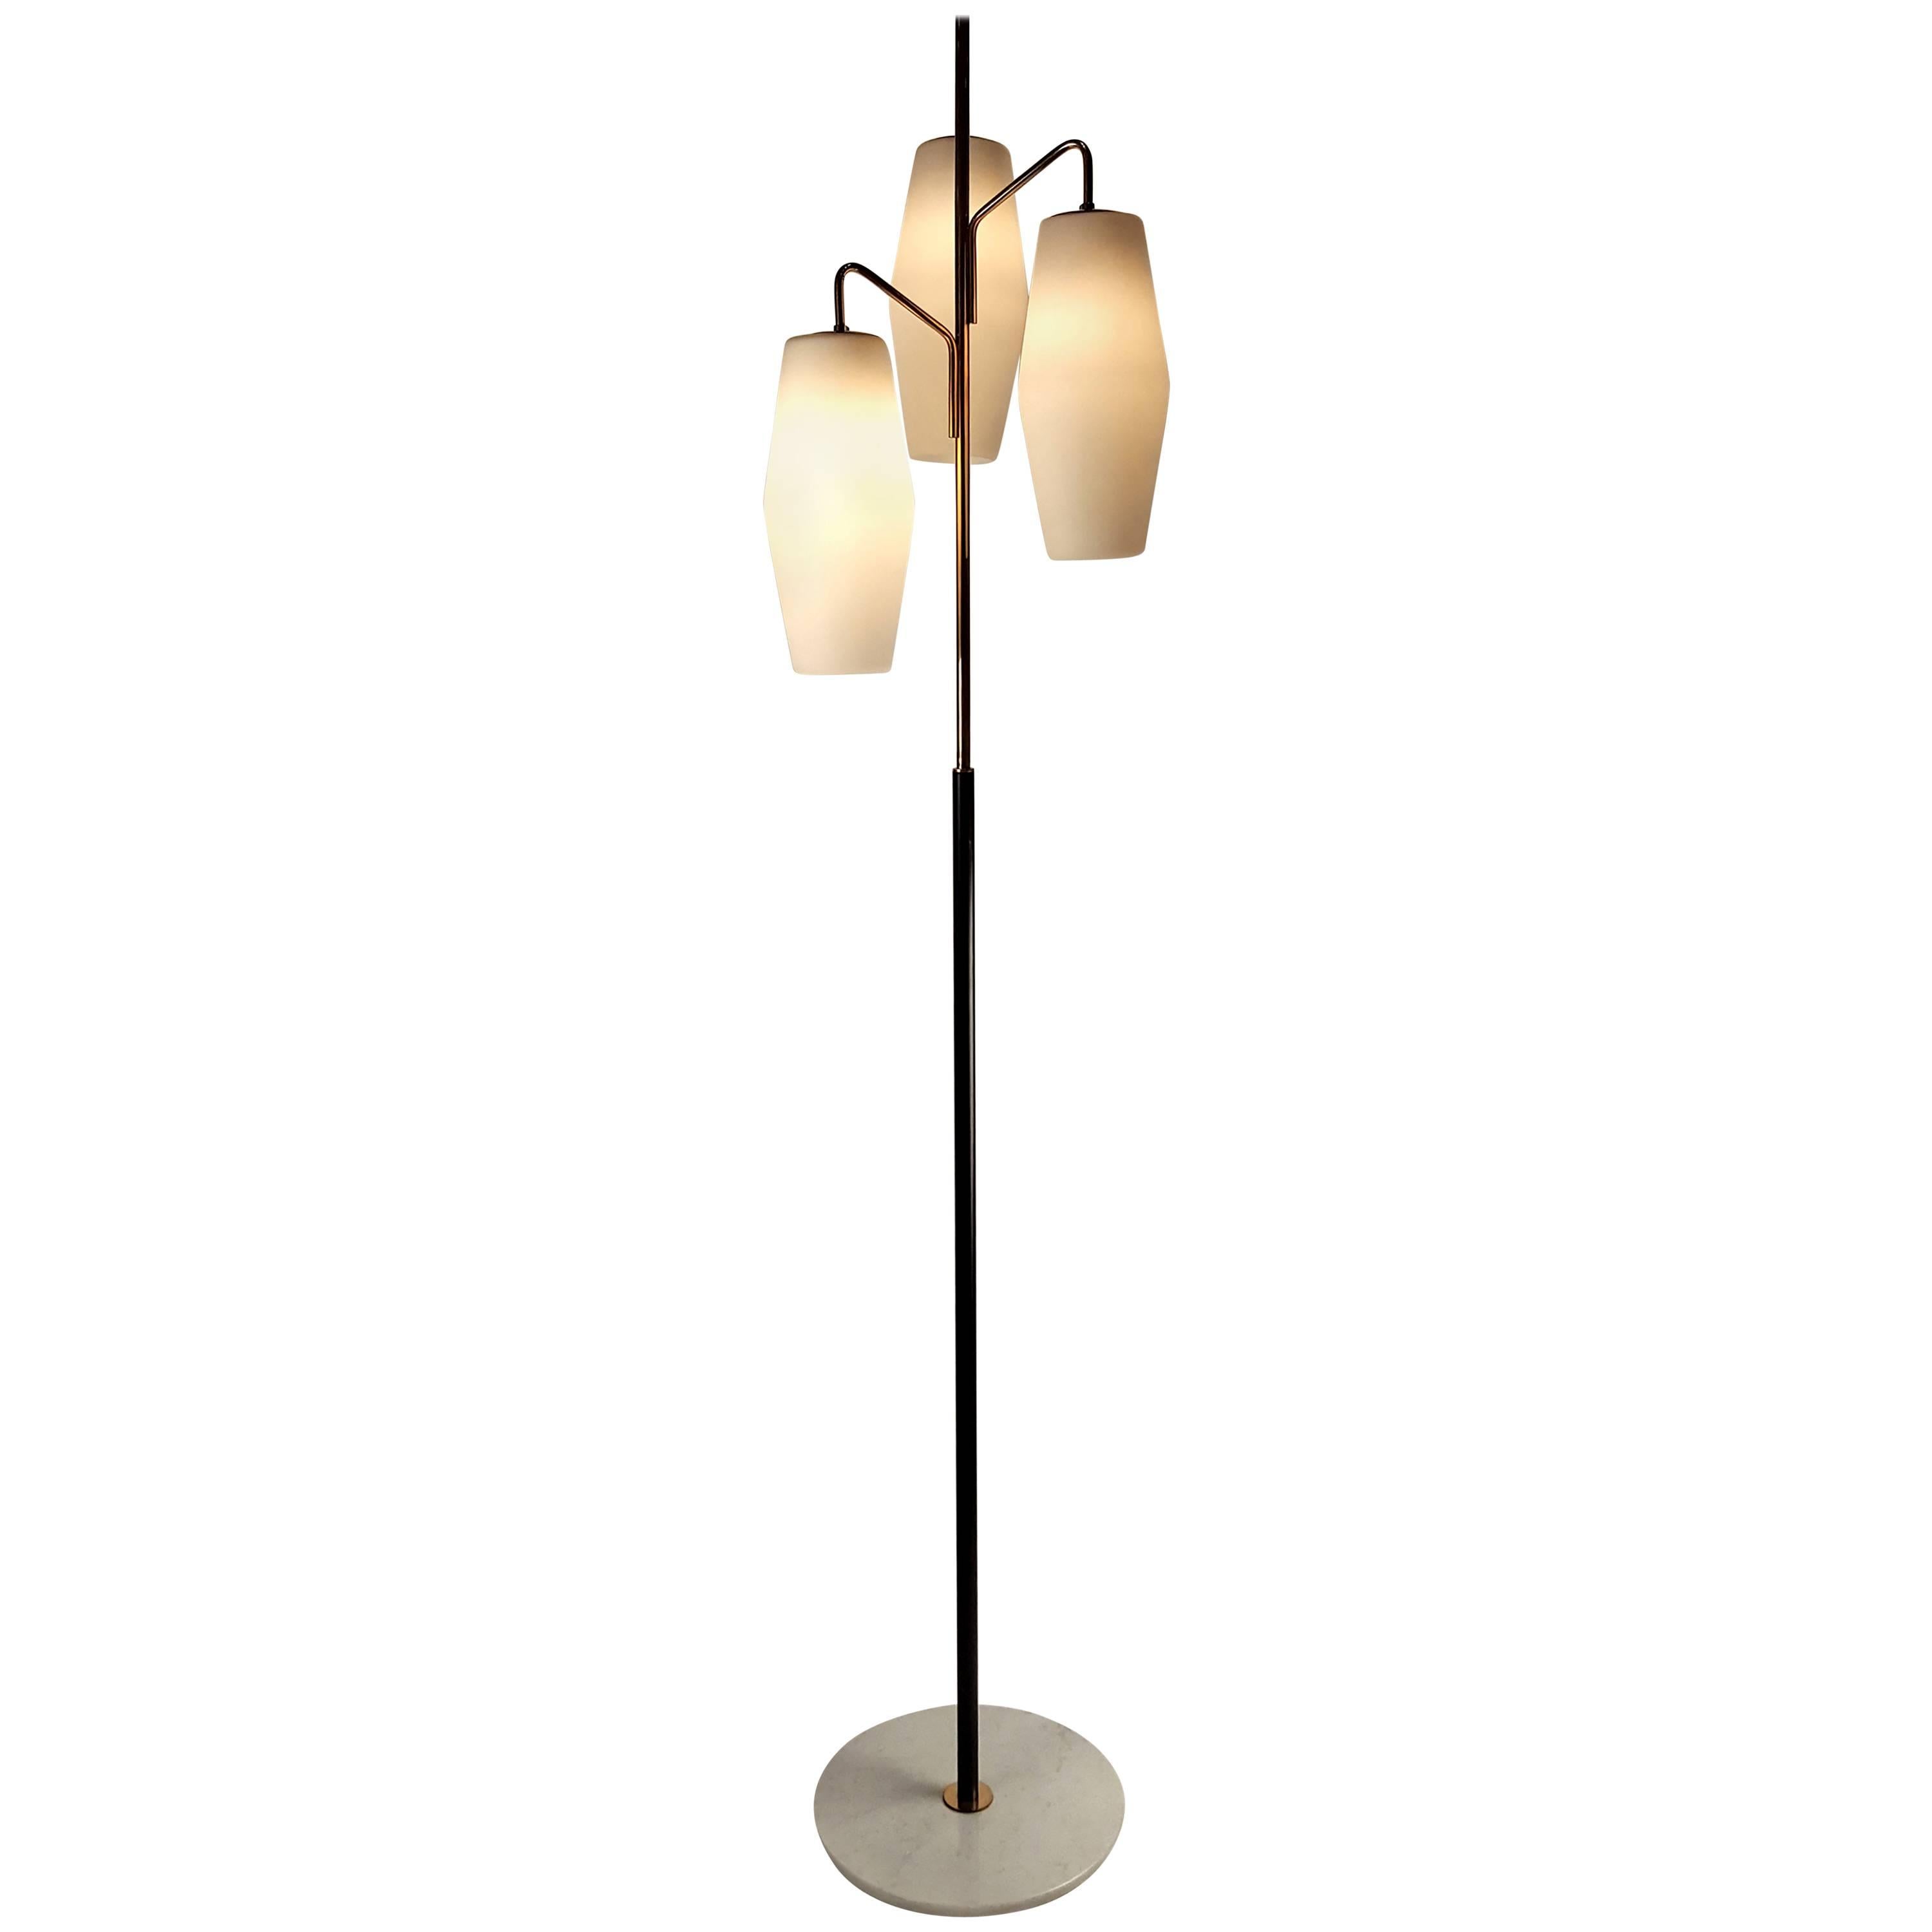 Italian Modernist Stilnovo Floor Lamp with Frosted Glass Shades and Marble Base